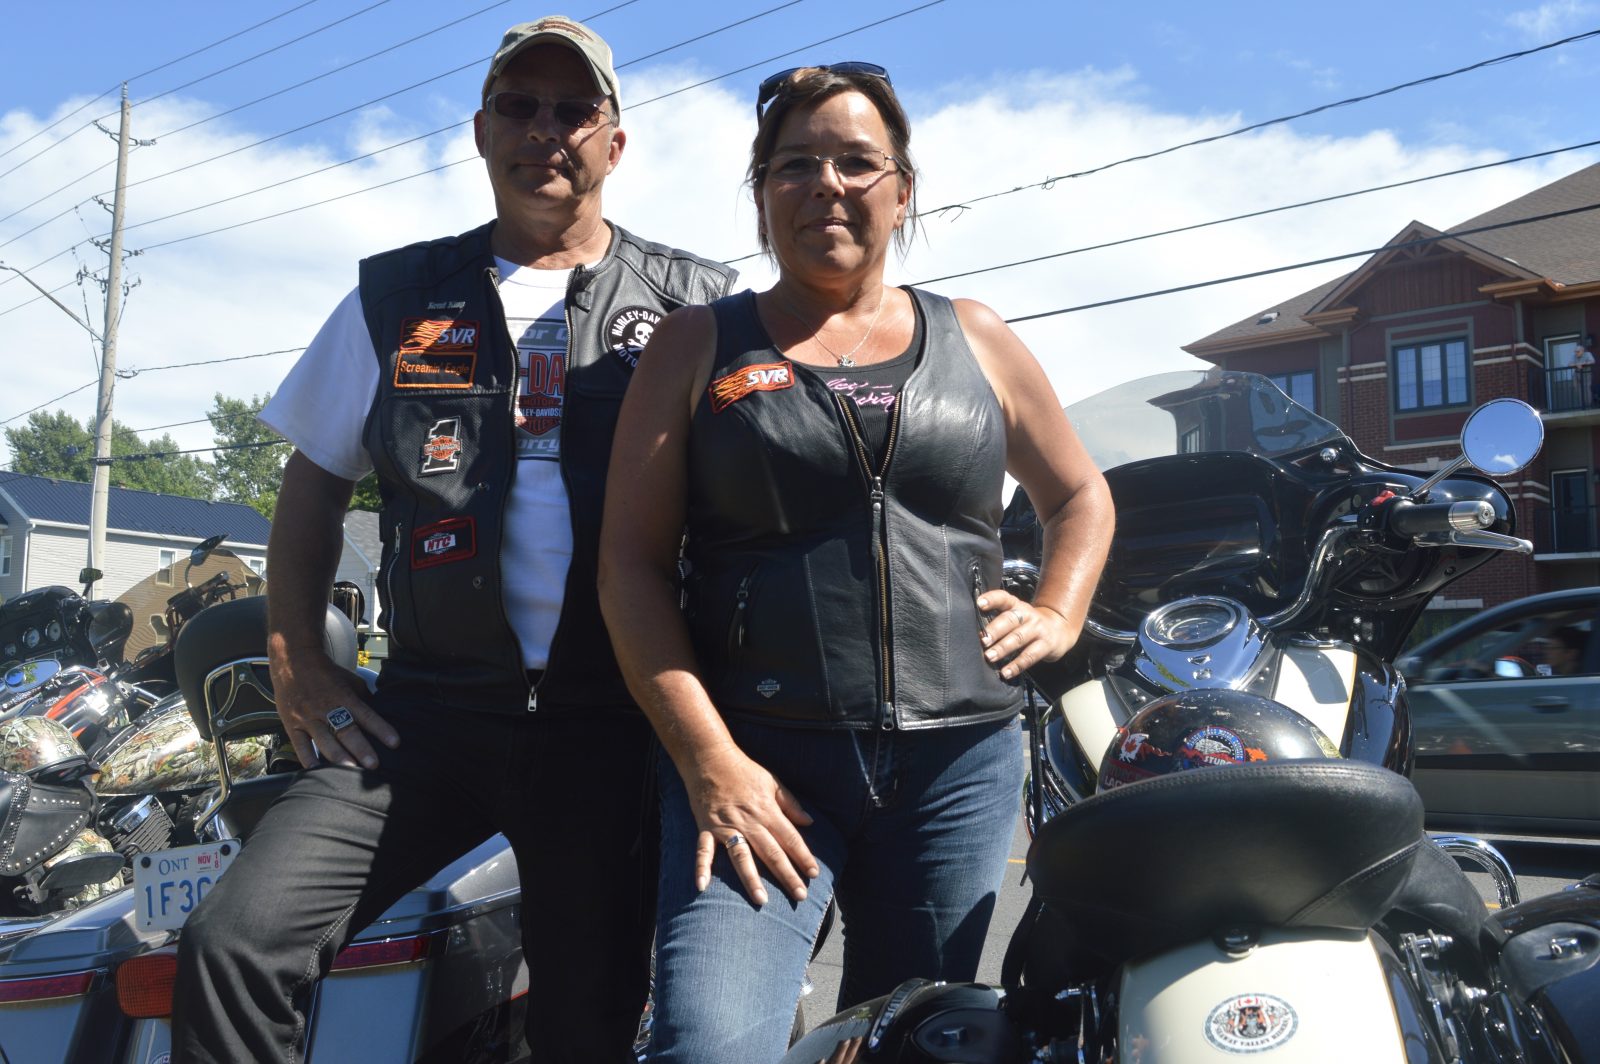 Seaway Valley Riders raise money for Hospice